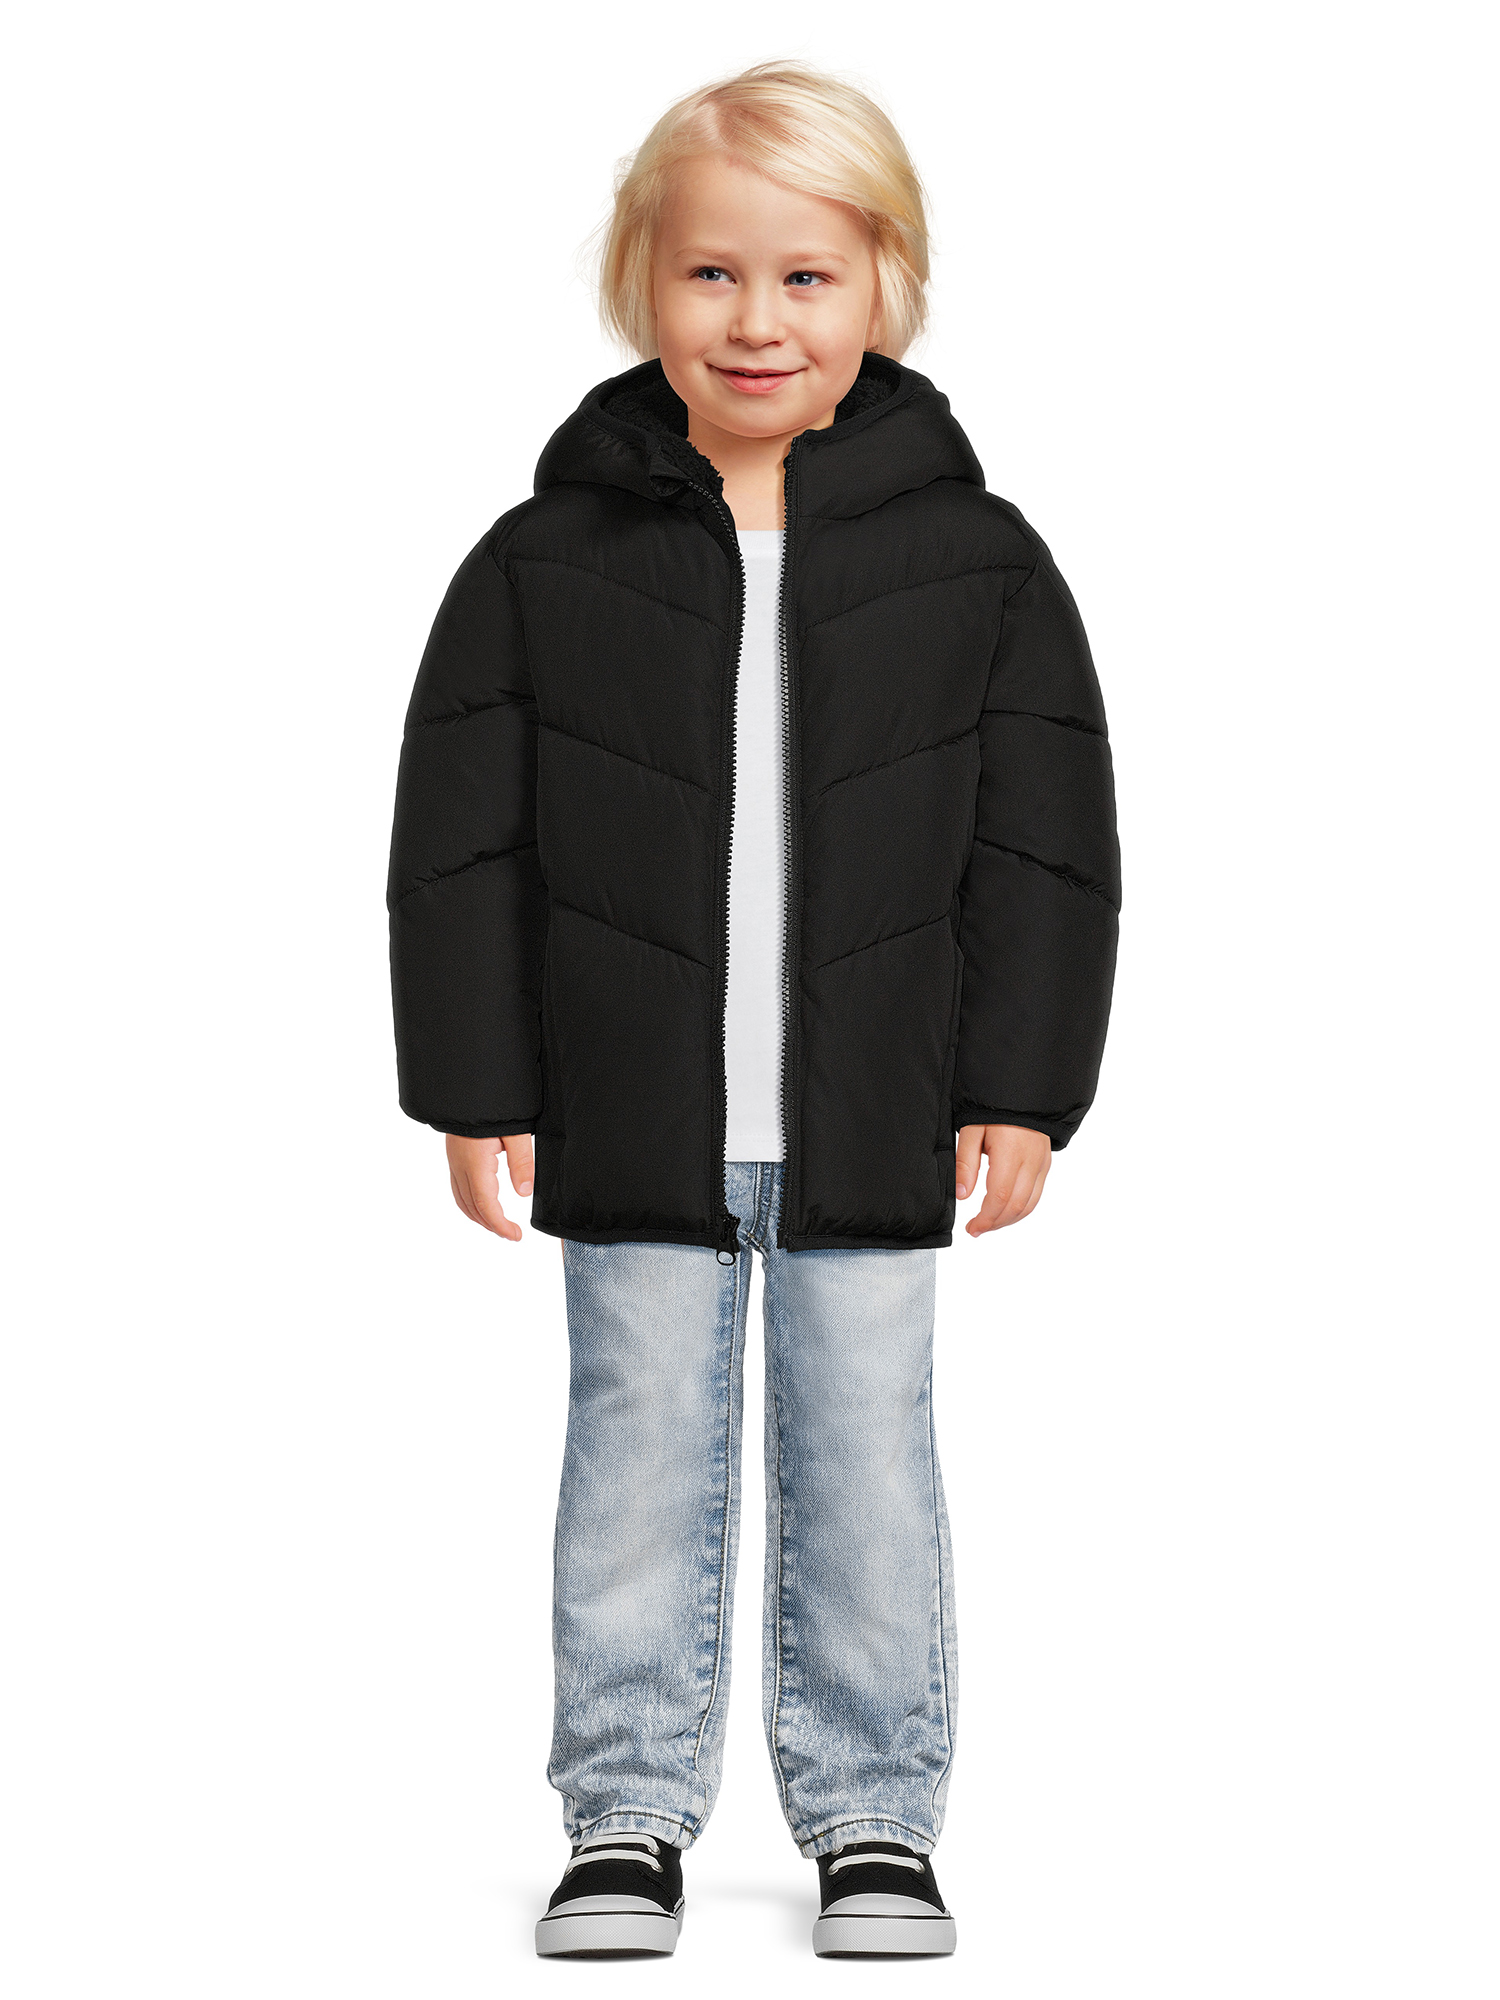 Swiss Tech Baby and Toddler Boy Heavyweight Puffer Jacket, Sizes 12M-5T - image 4 of 5